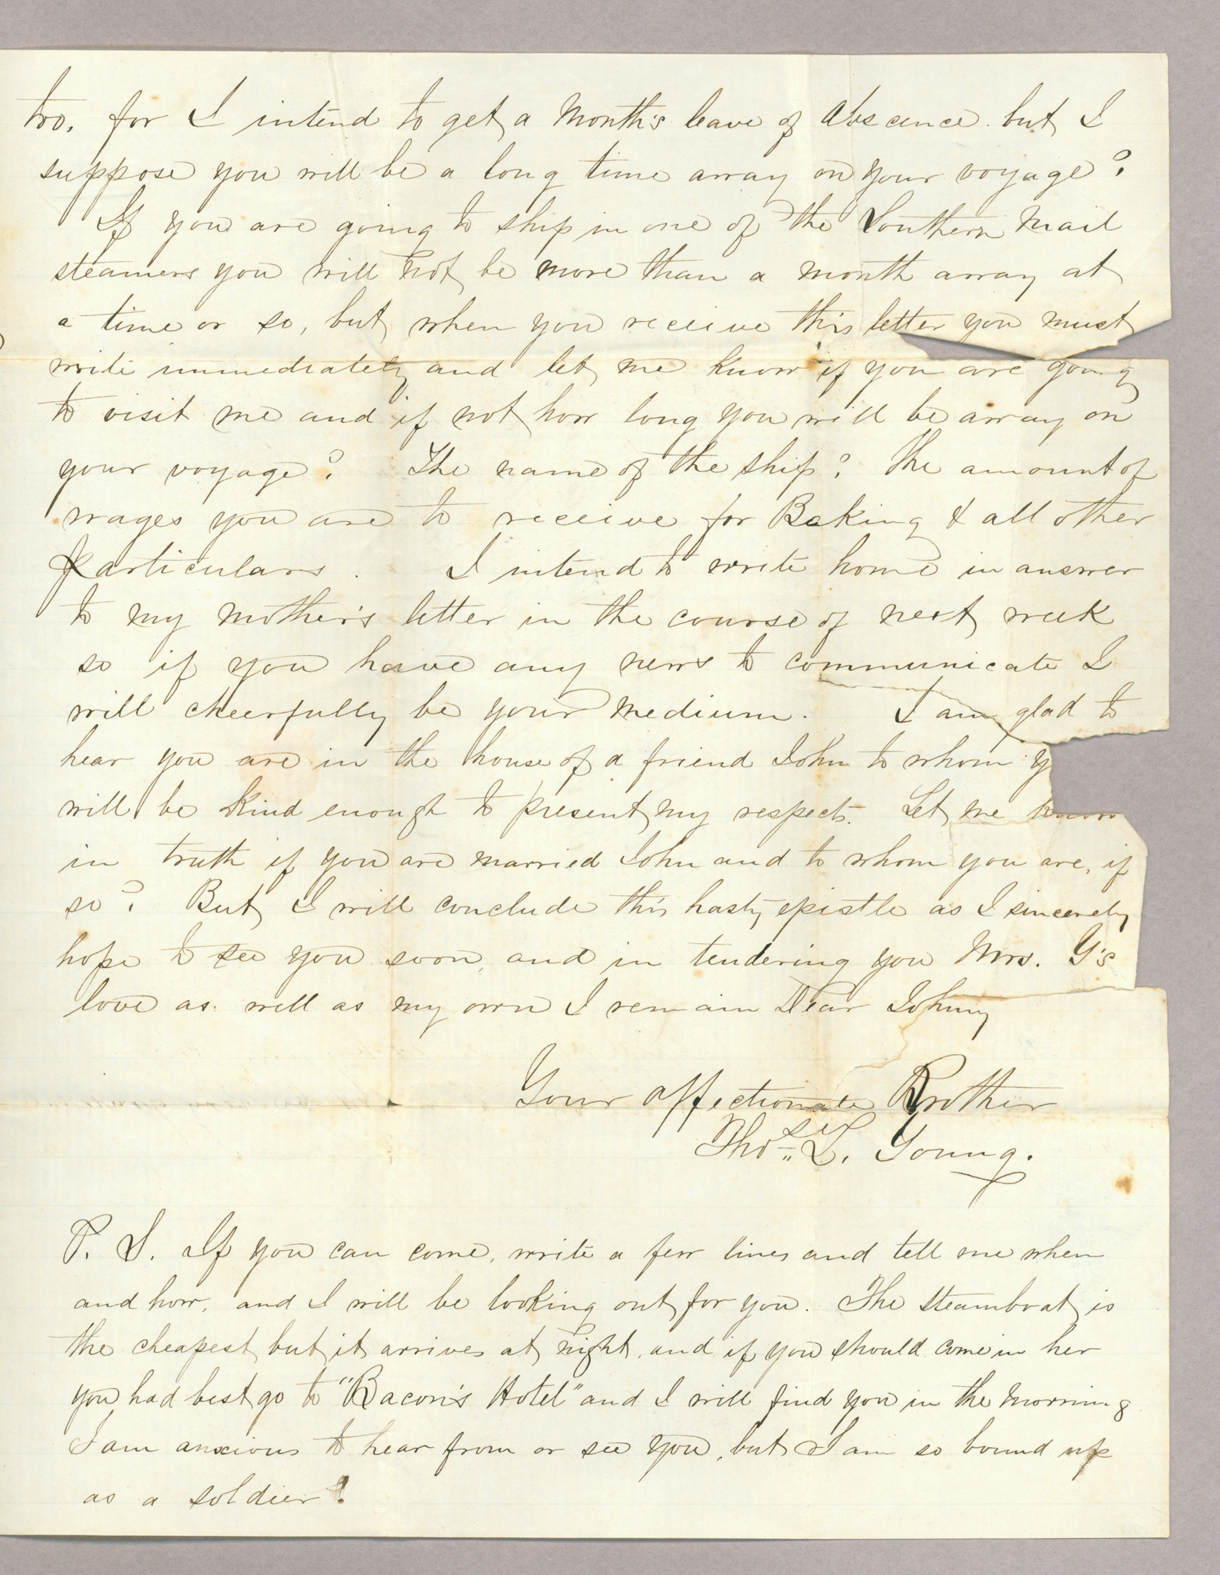 Letter. Tho[ma]s L[owry] Young, New London, Connecticut, to Mr. John [E.] Brownlee, New York, New York, Page 3